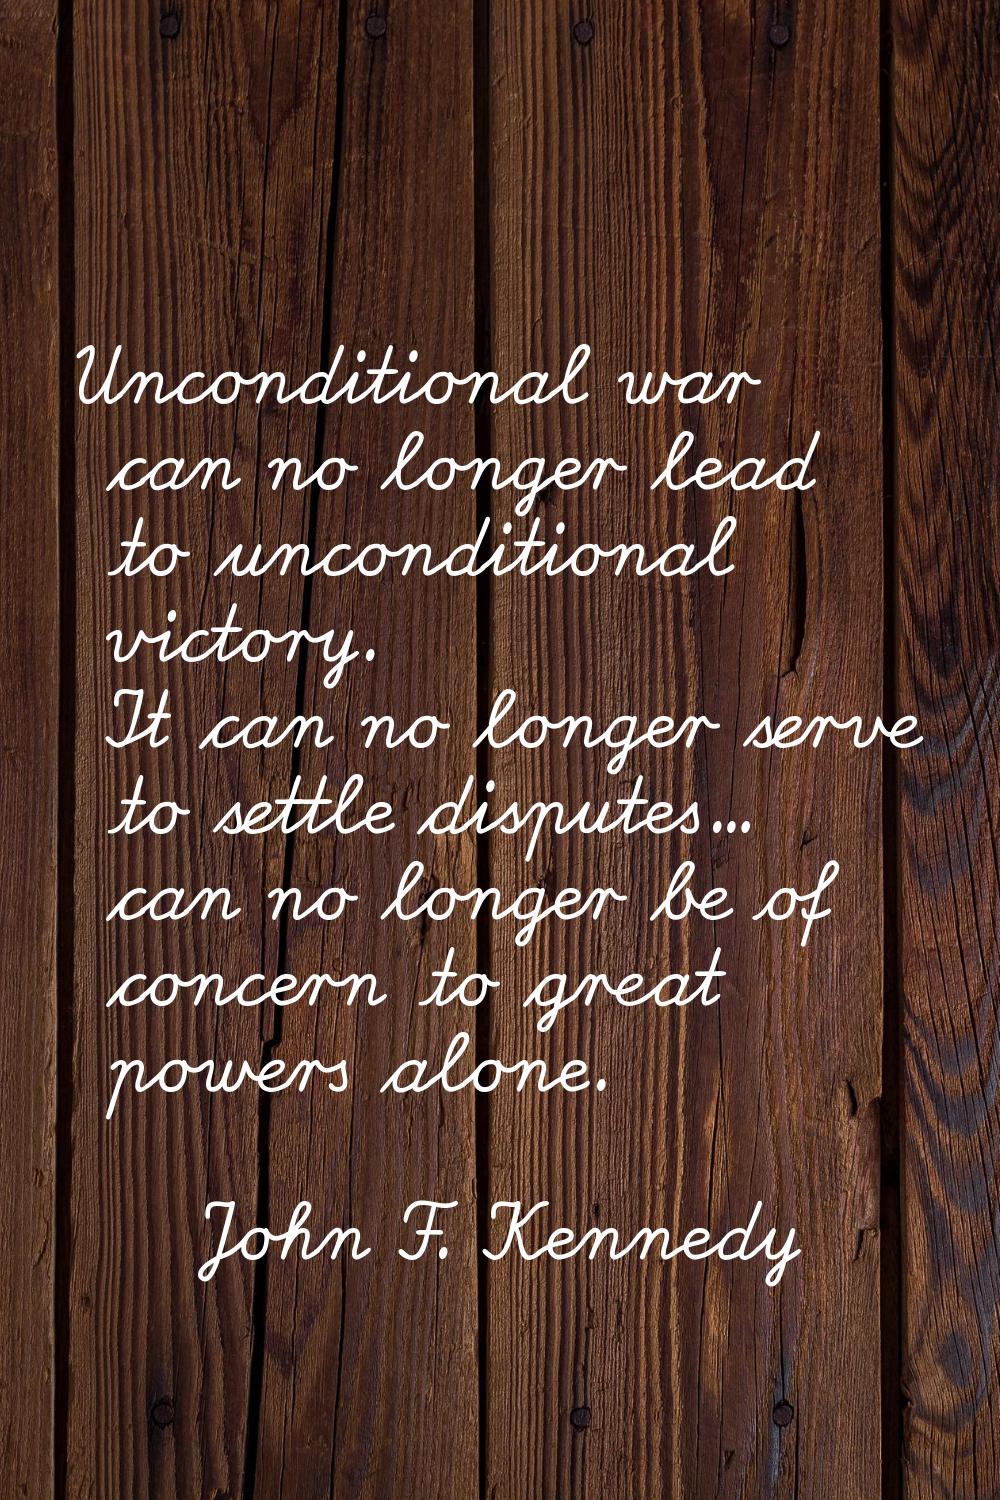 Unconditional war can no longer lead to unconditional victory. It can no longer serve to settle dis